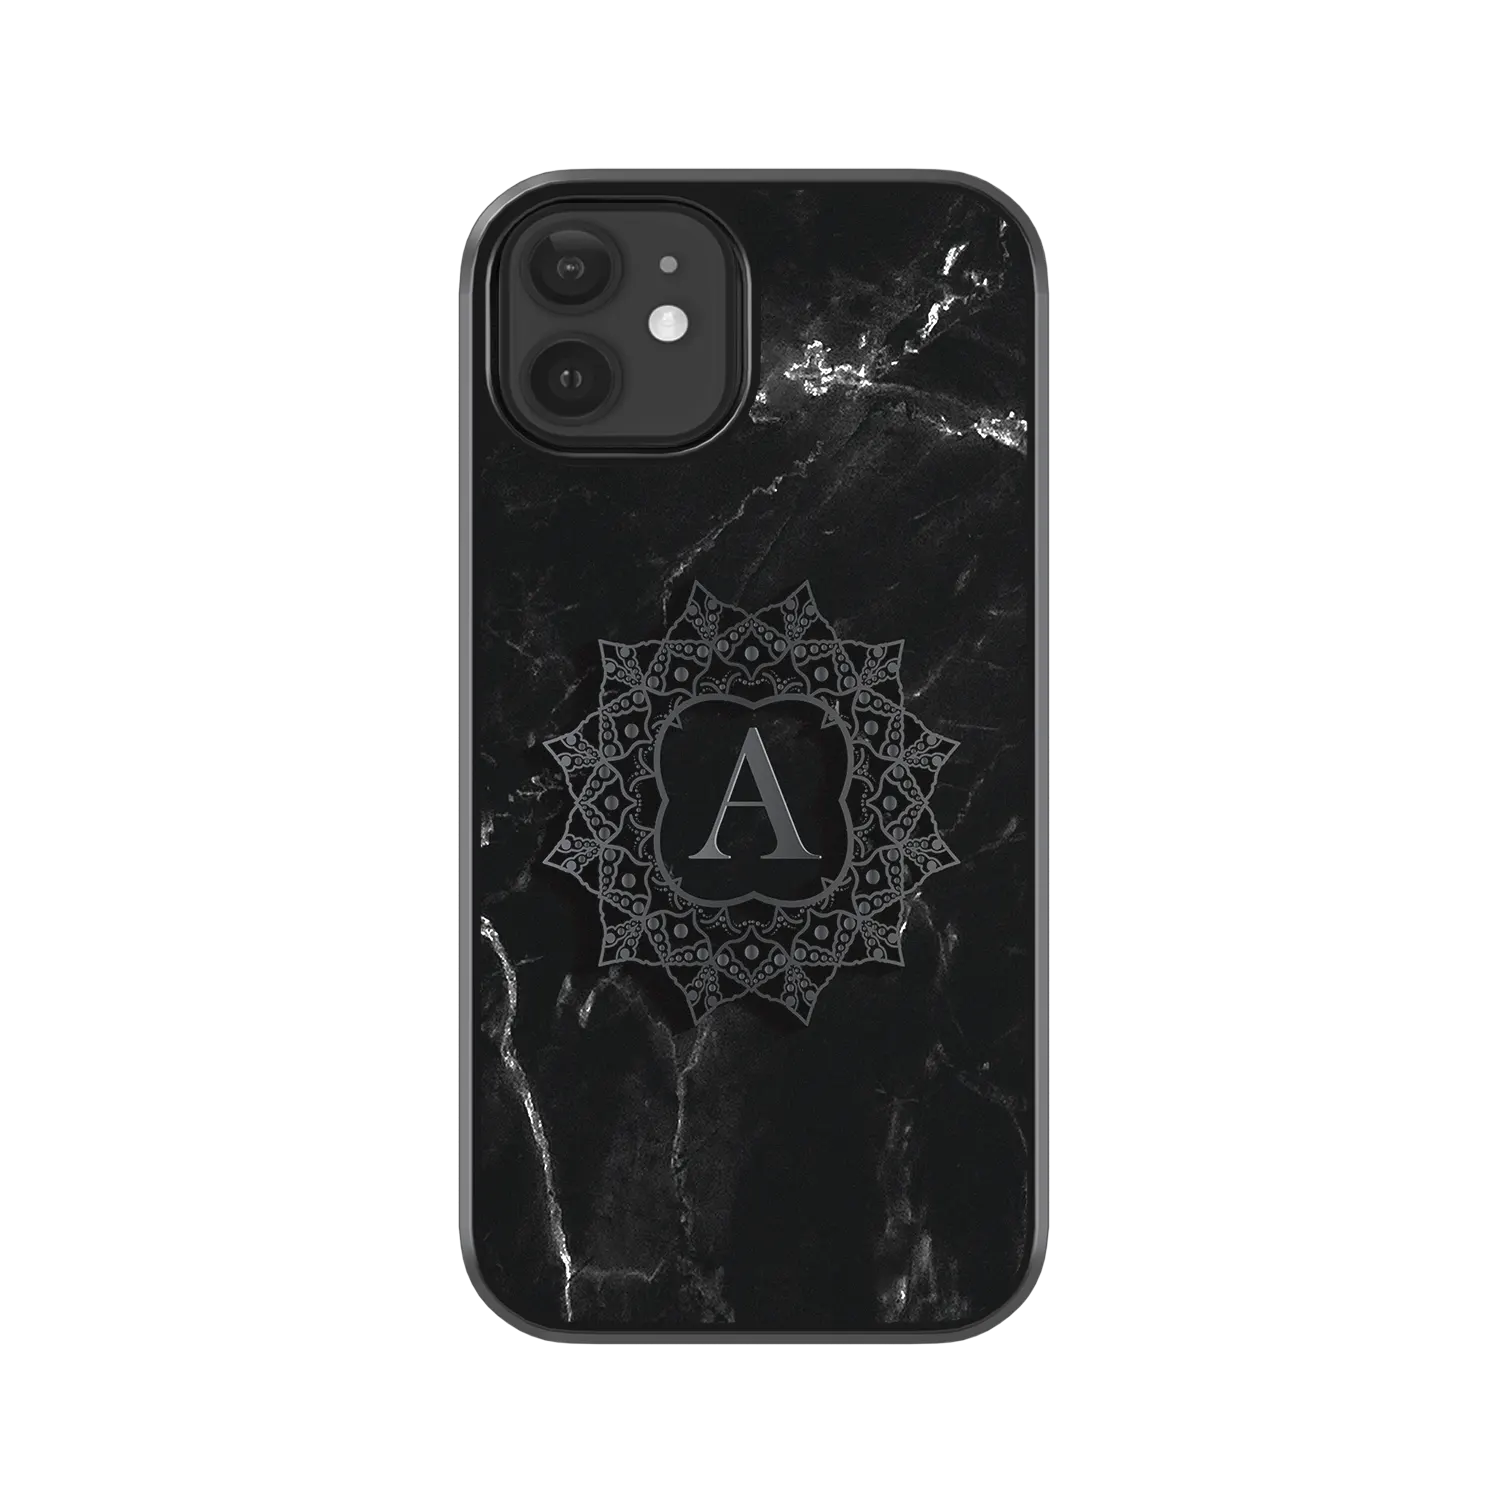 Achlys iphone 11 cover